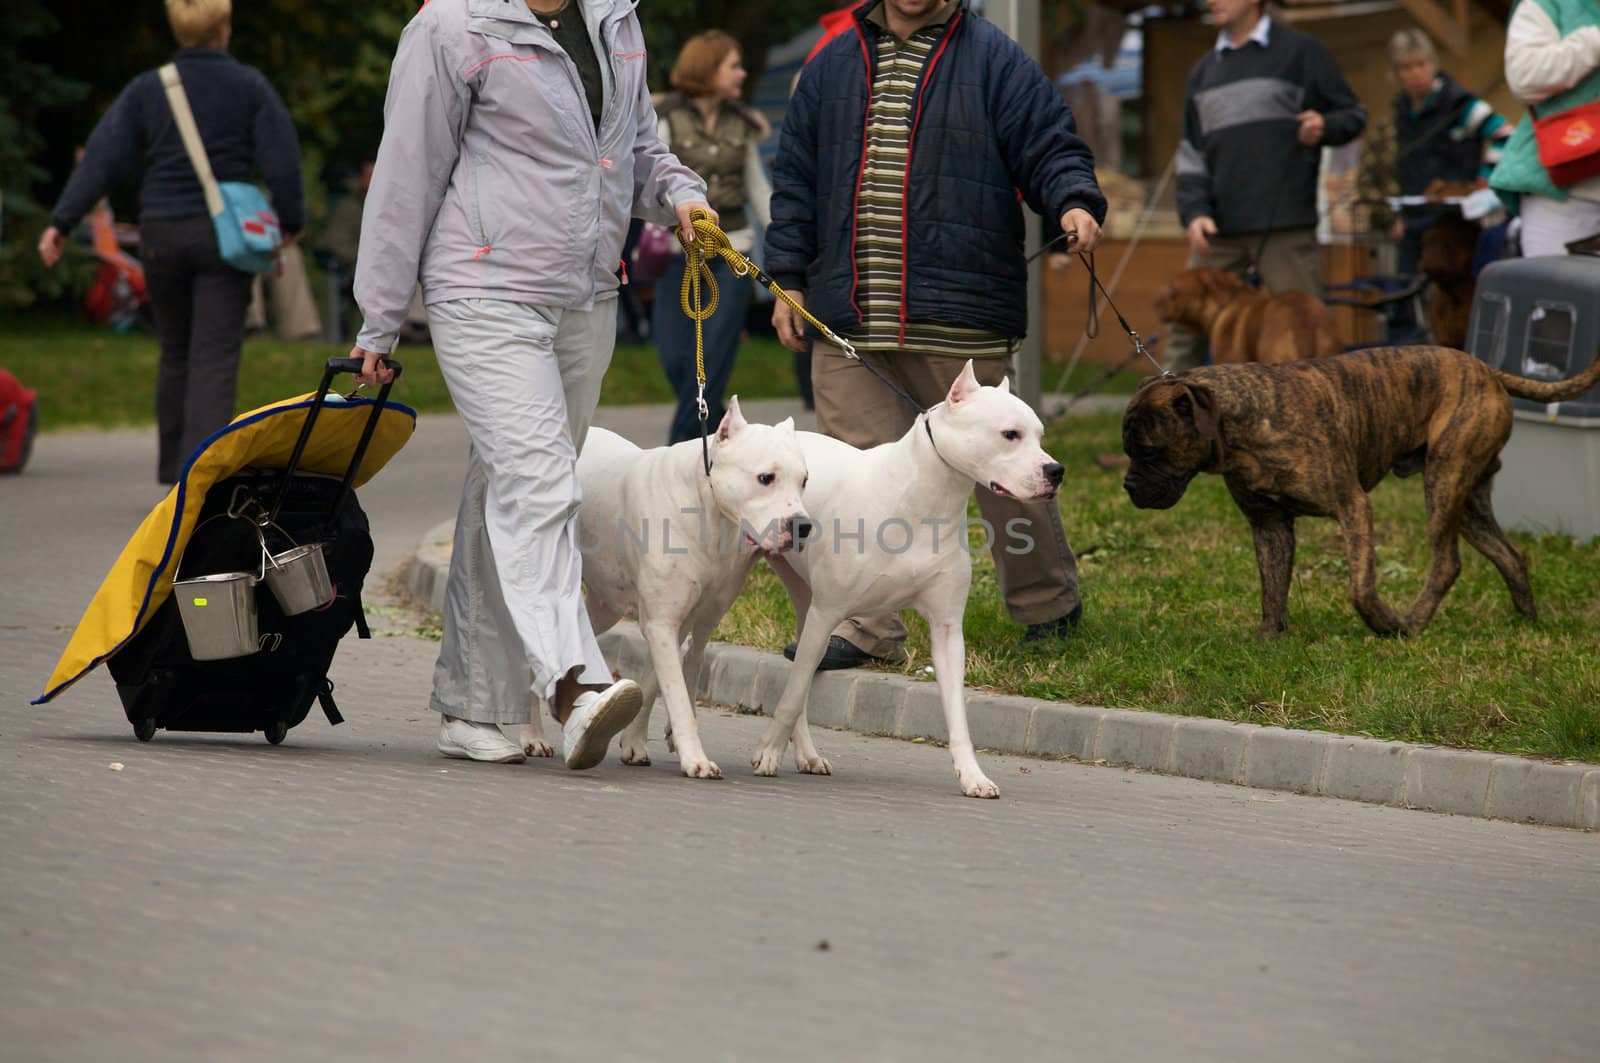 Two argentin dogs with their owner.